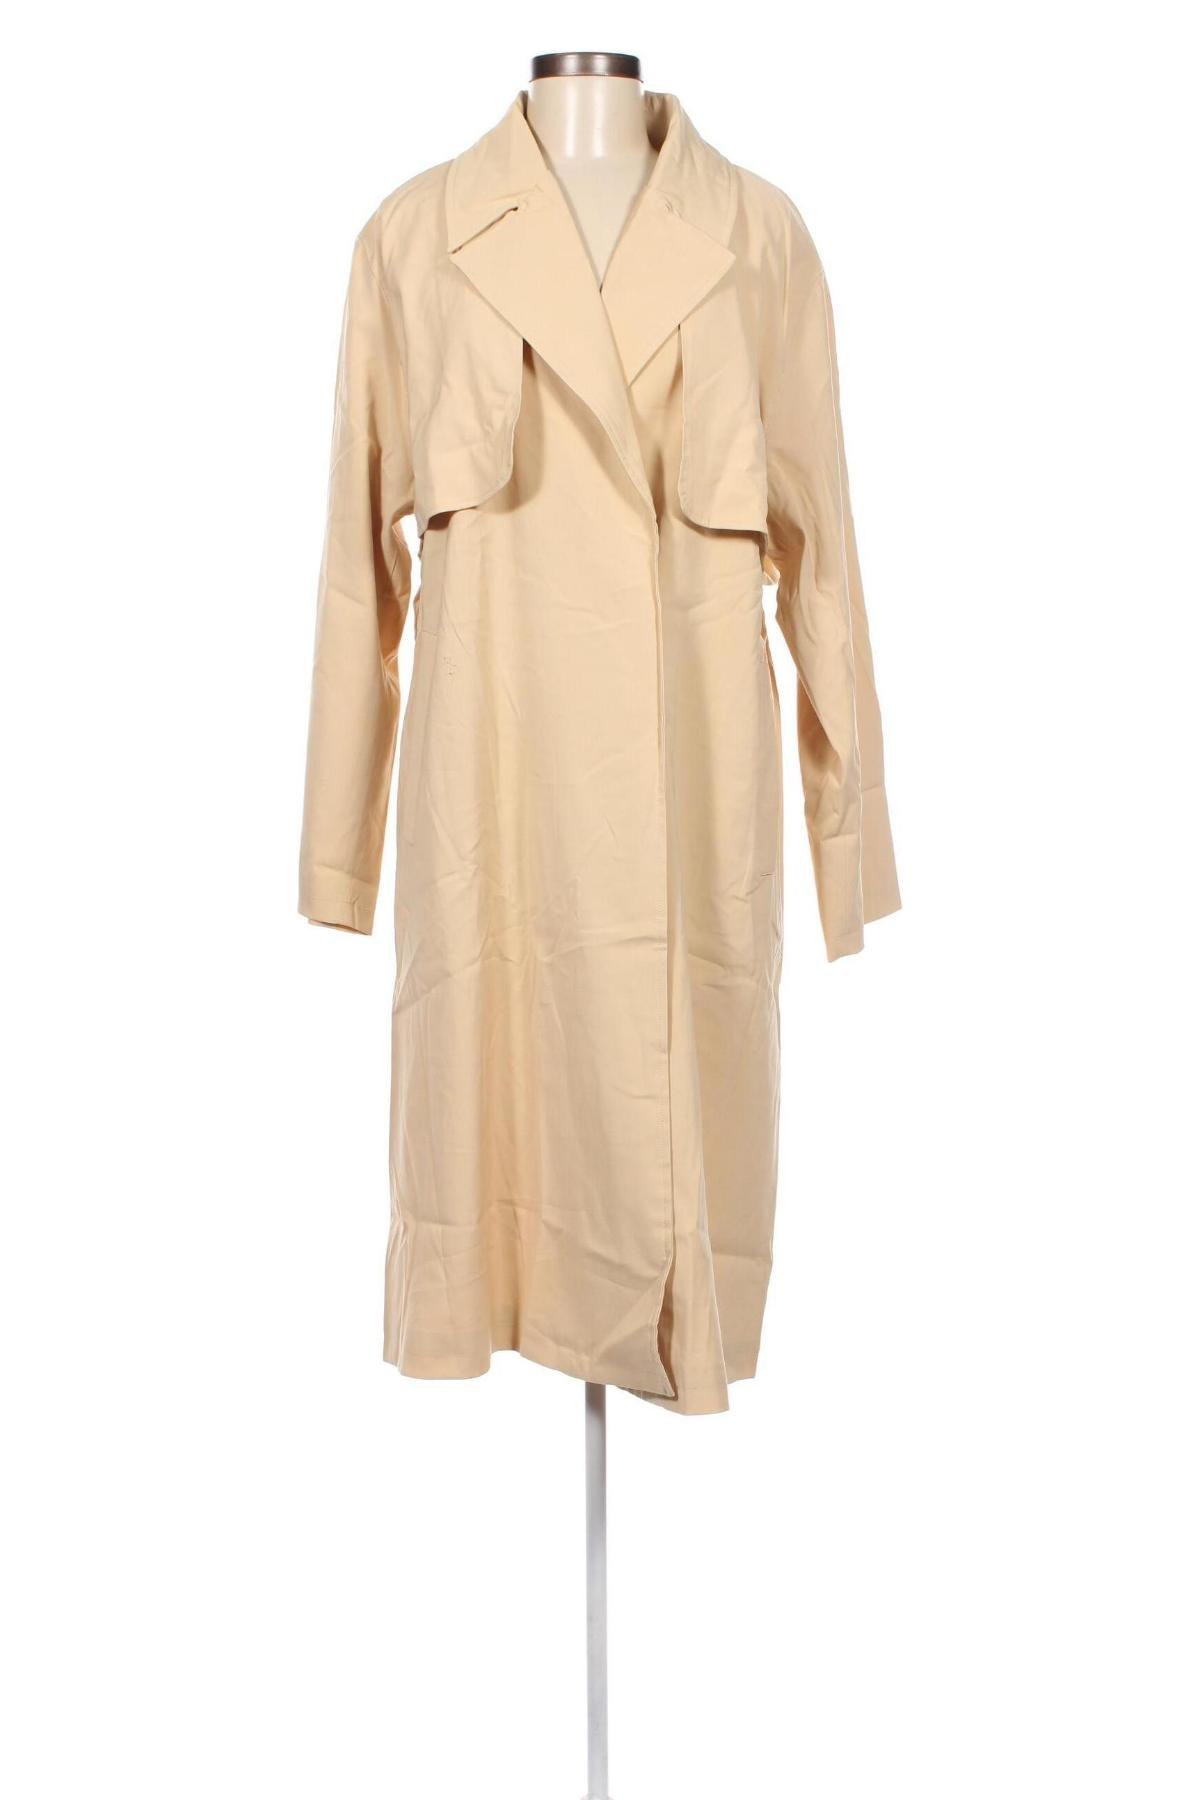 Damen Trenchcoat Katy Perry exclusive for ABOUT YOU, Größe S, Farbe Beige, Preis 10,44 €